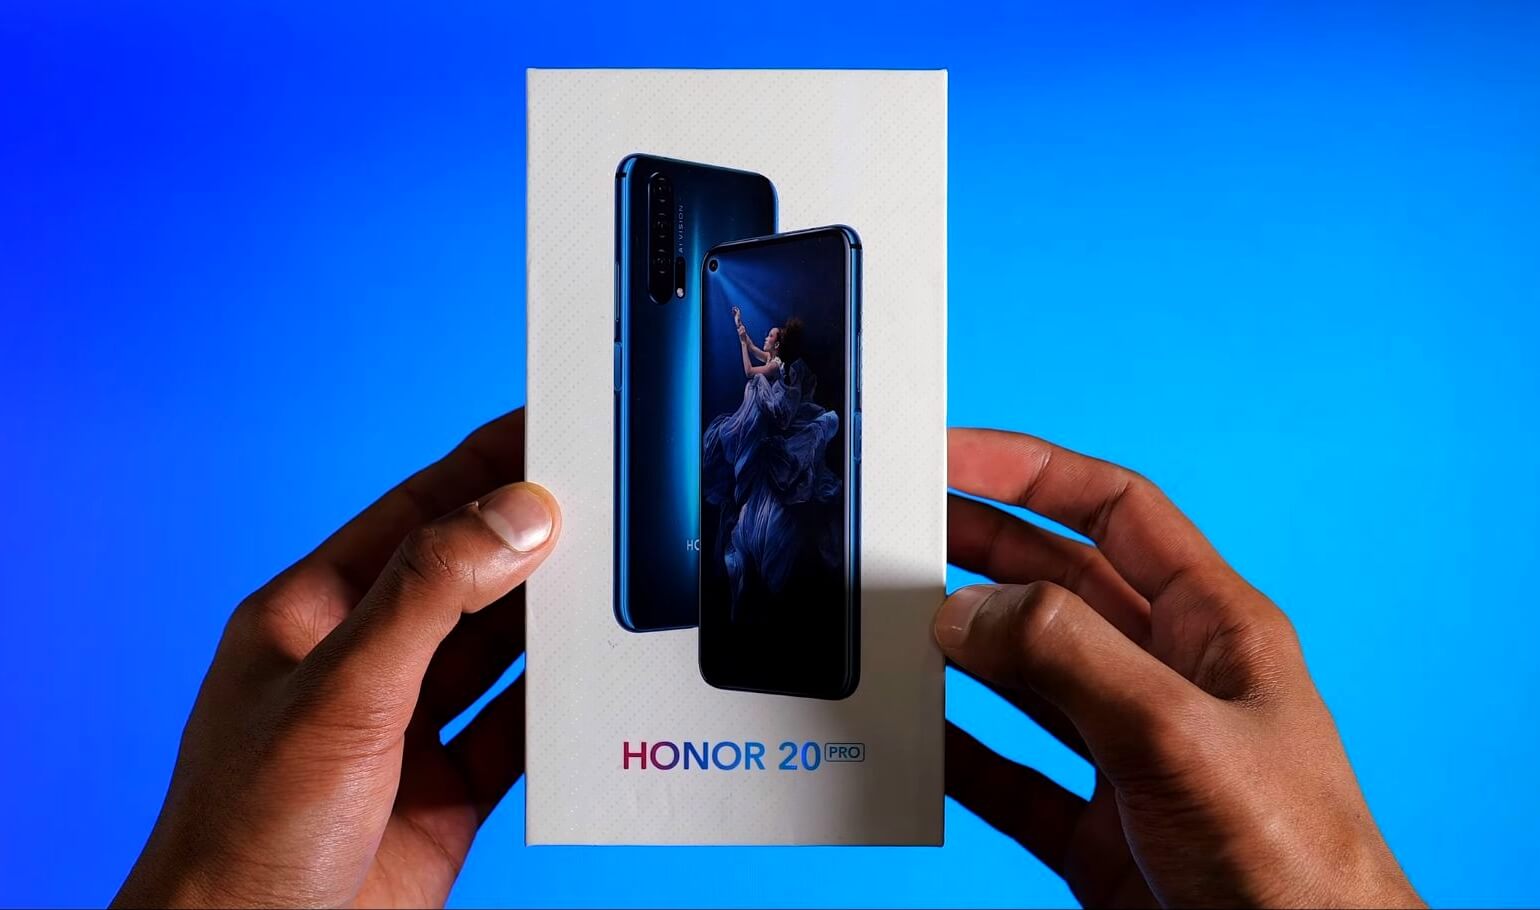 Honor 20 Smartphone Pro recension med 30x zoom